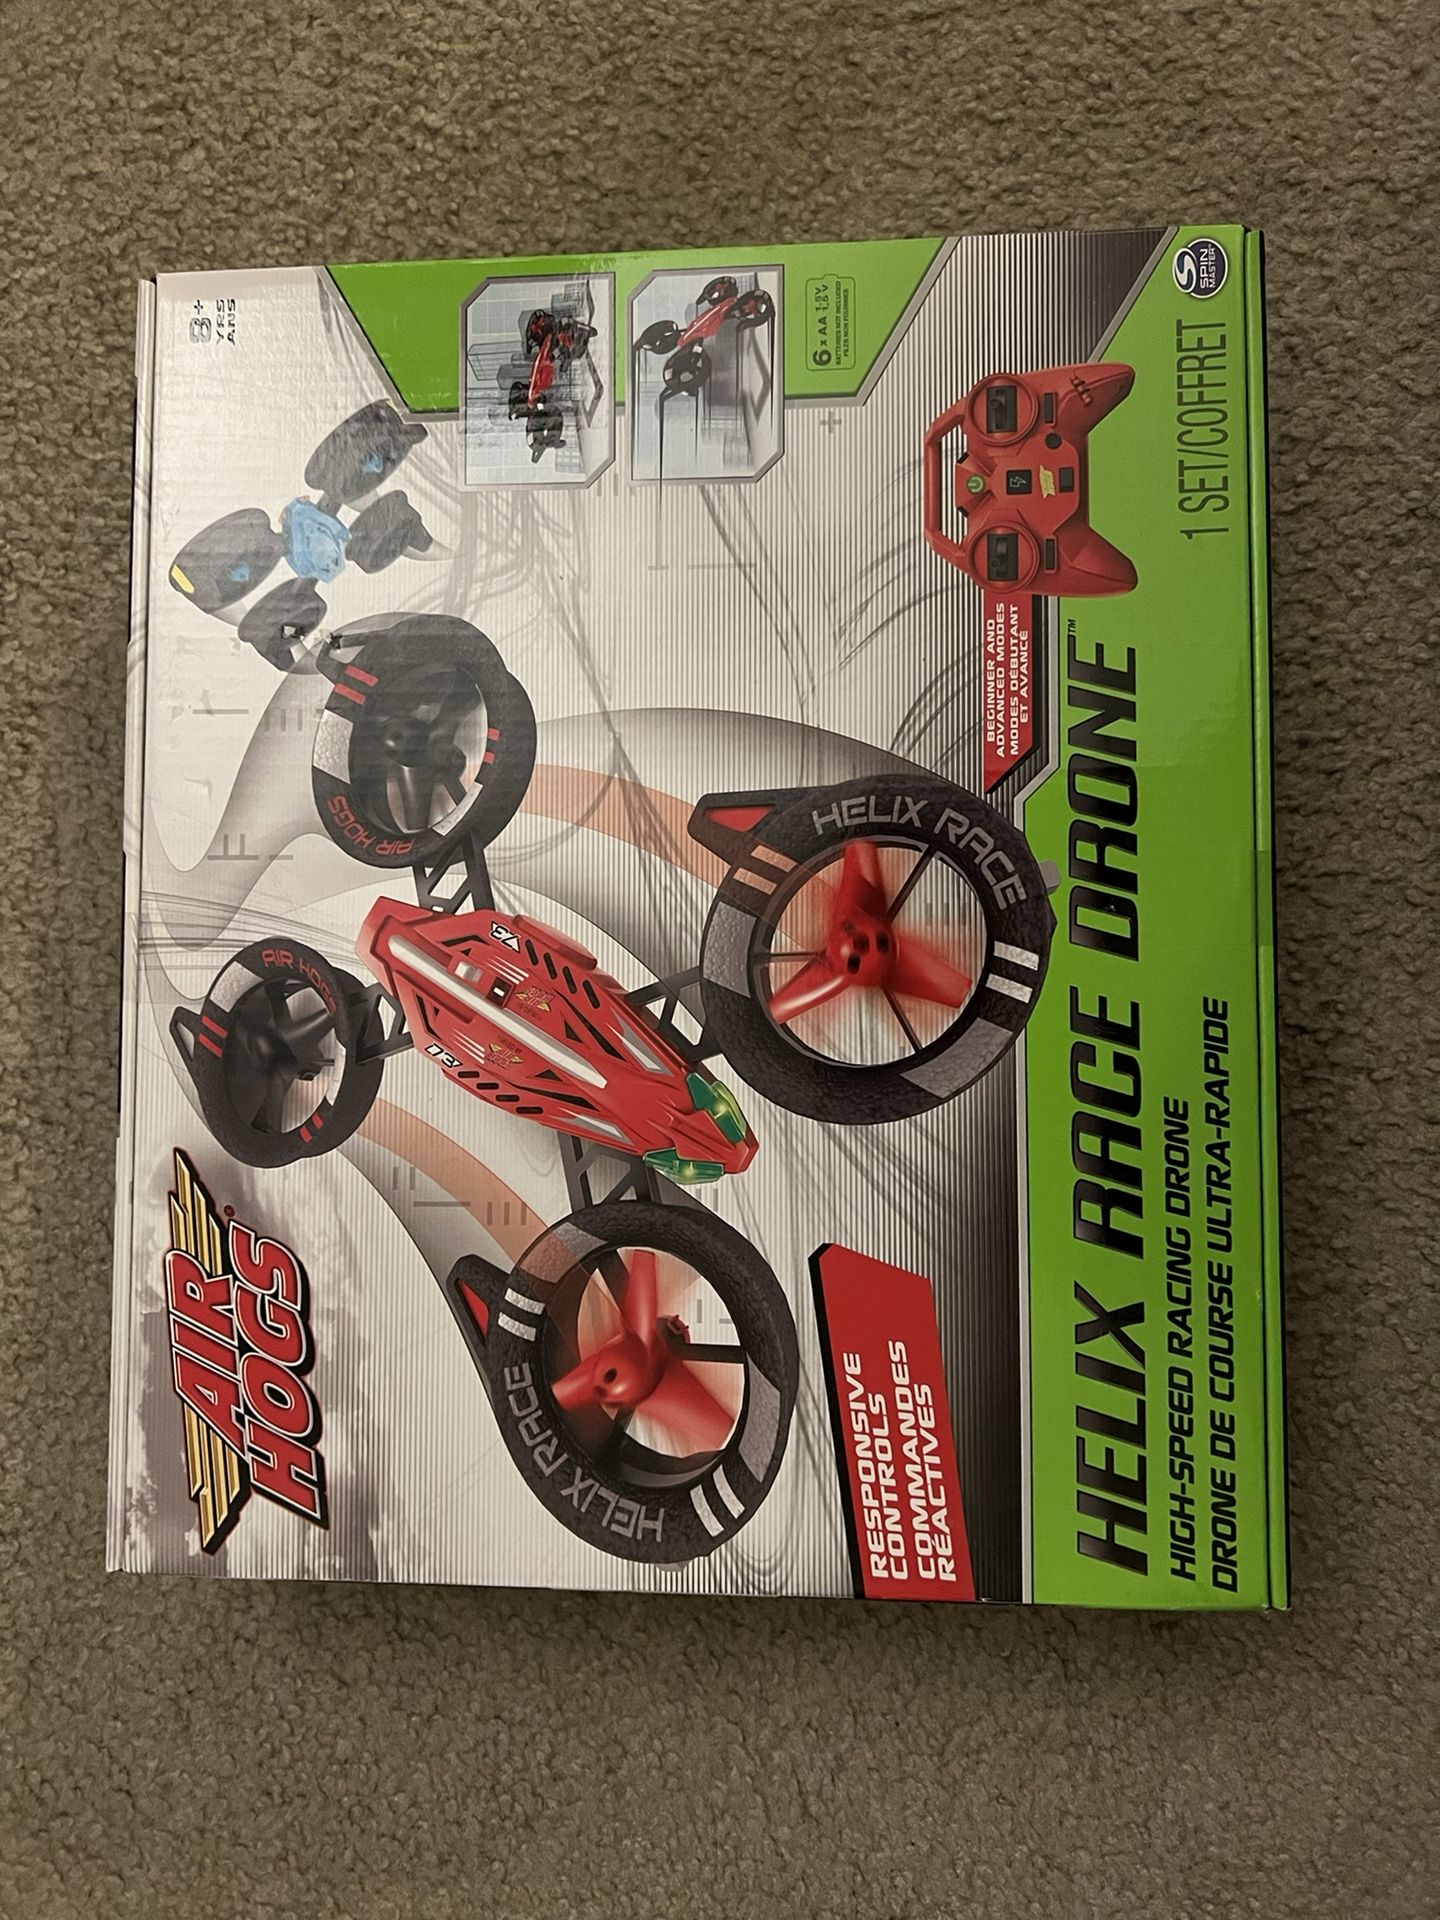 Race drone new in box